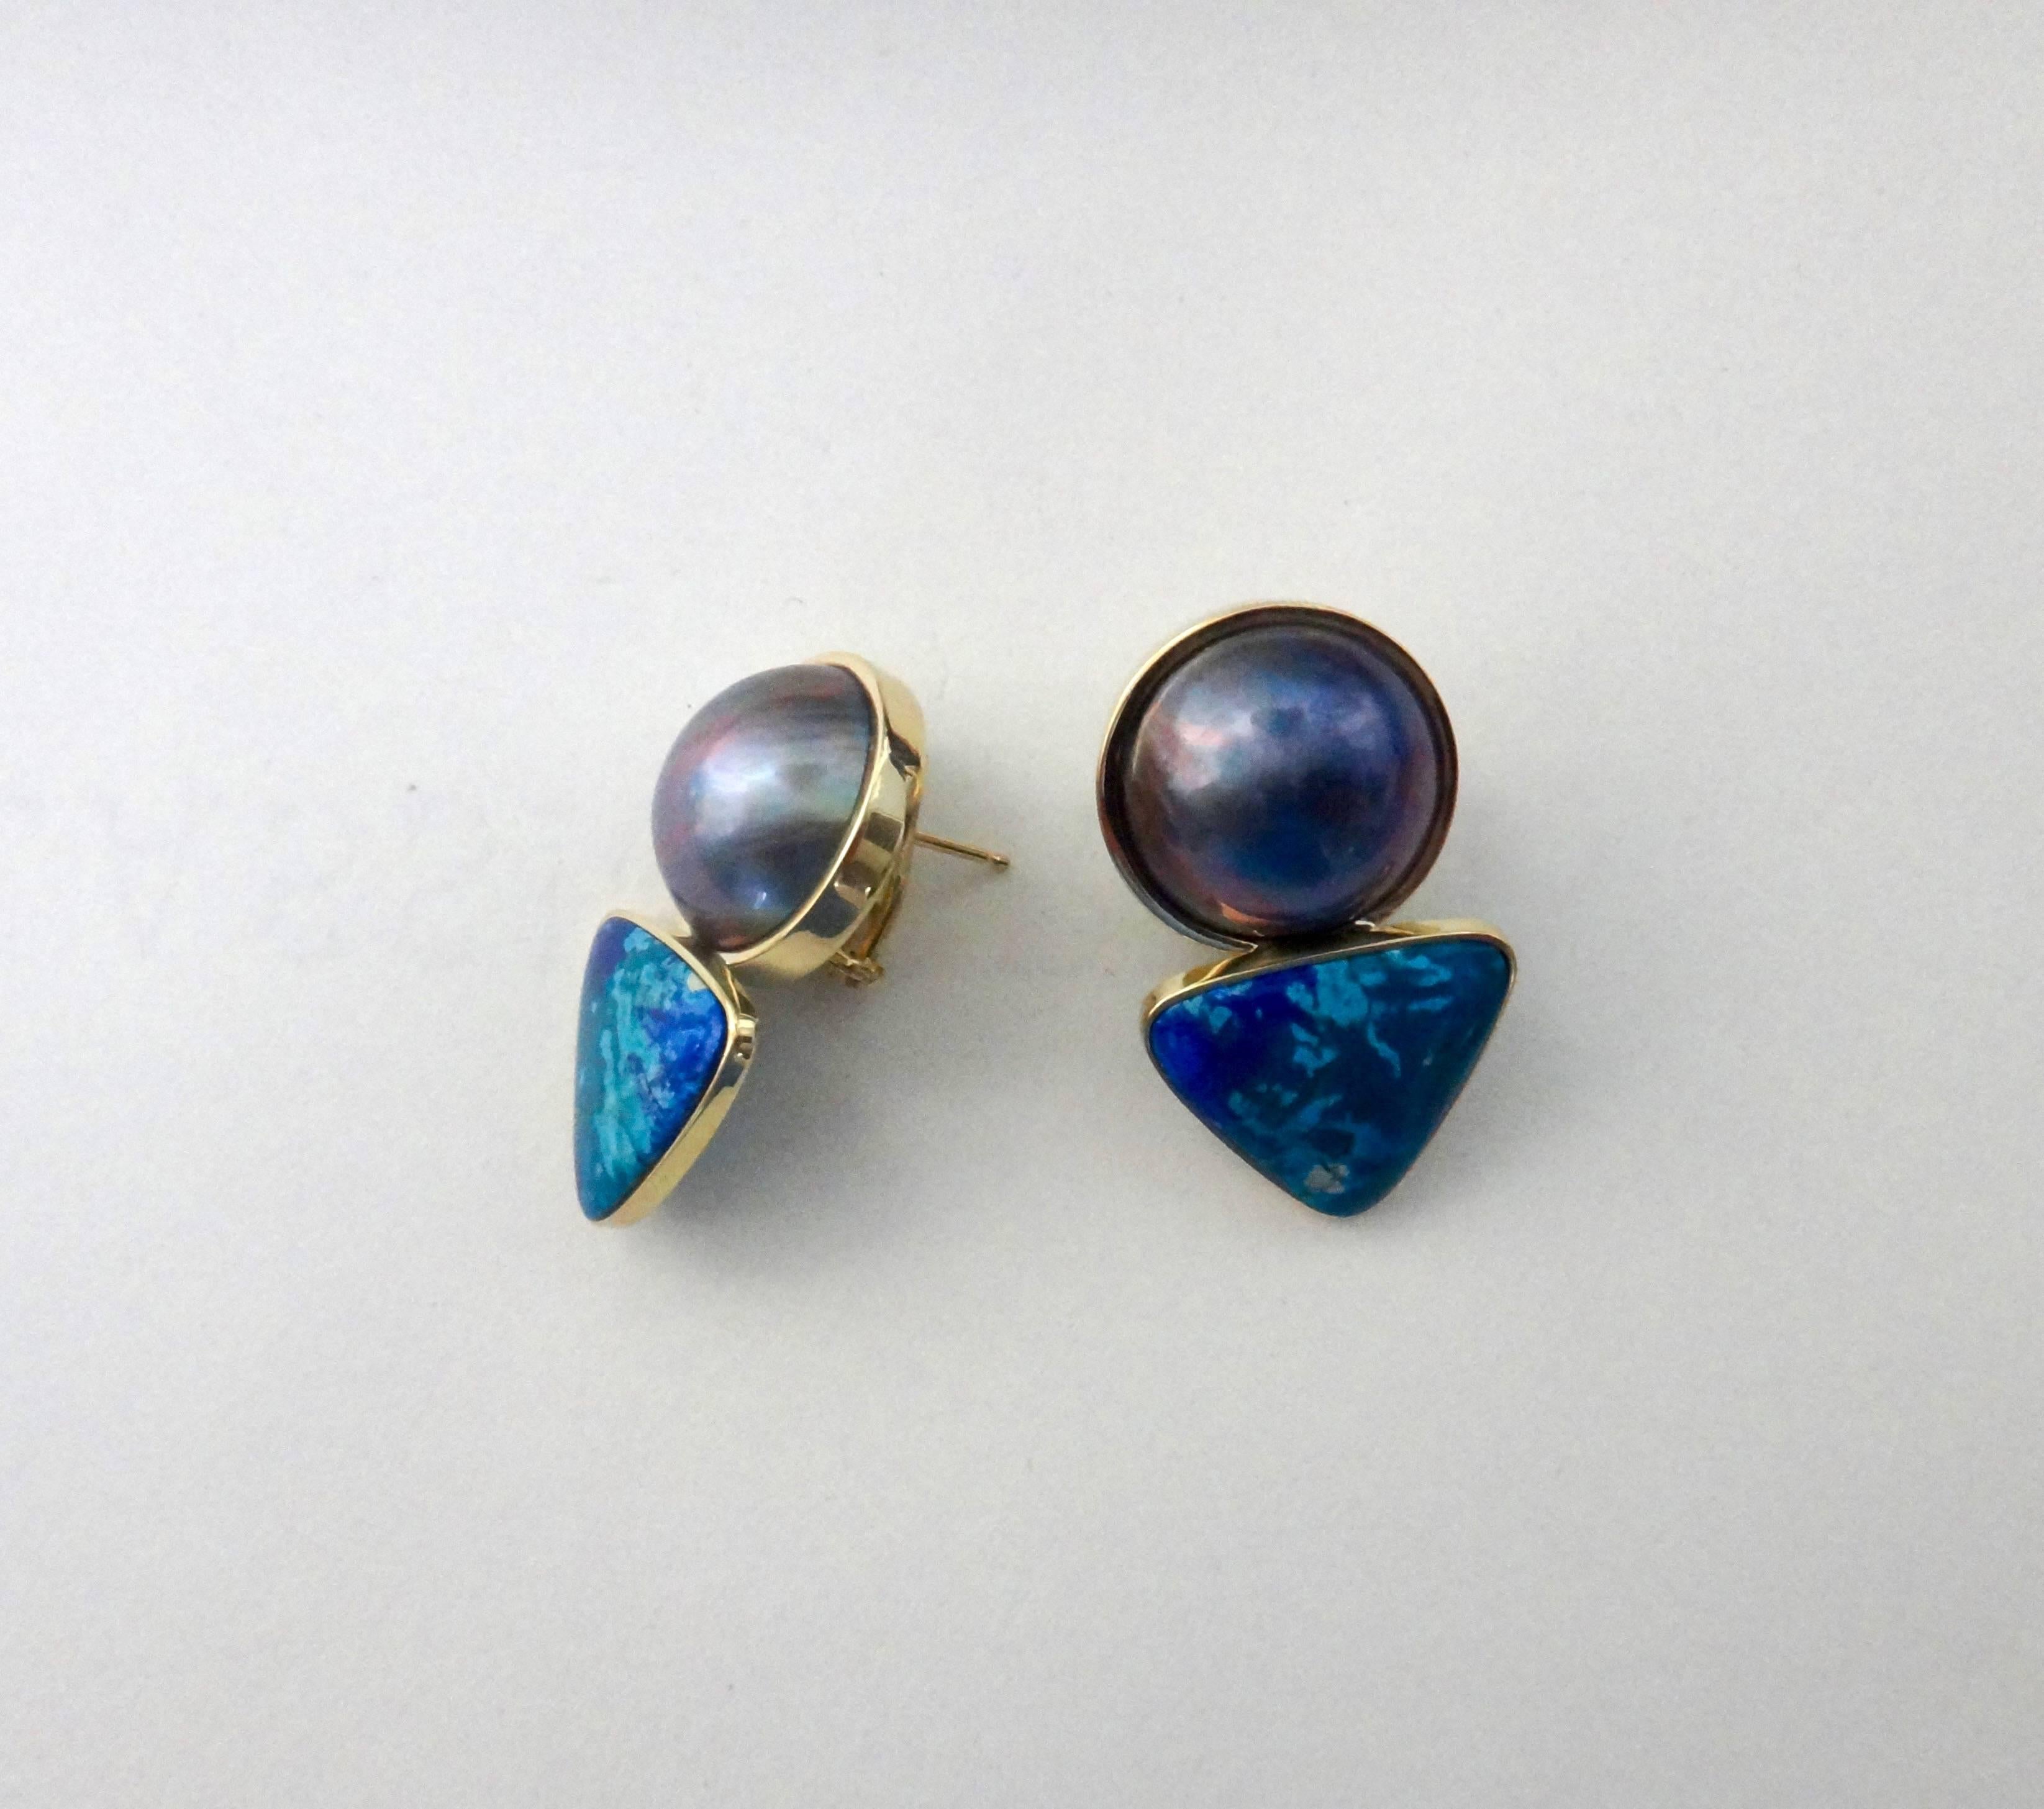 Huge (18mm) gray mabe pearls reflecting a rainbow of colors are paired with triangle shaped cabochons of azurite in chrysocolla in these daring drop earrings.  The gems are set in handmade 18k yellow gold mountings and come with posts and omega clip